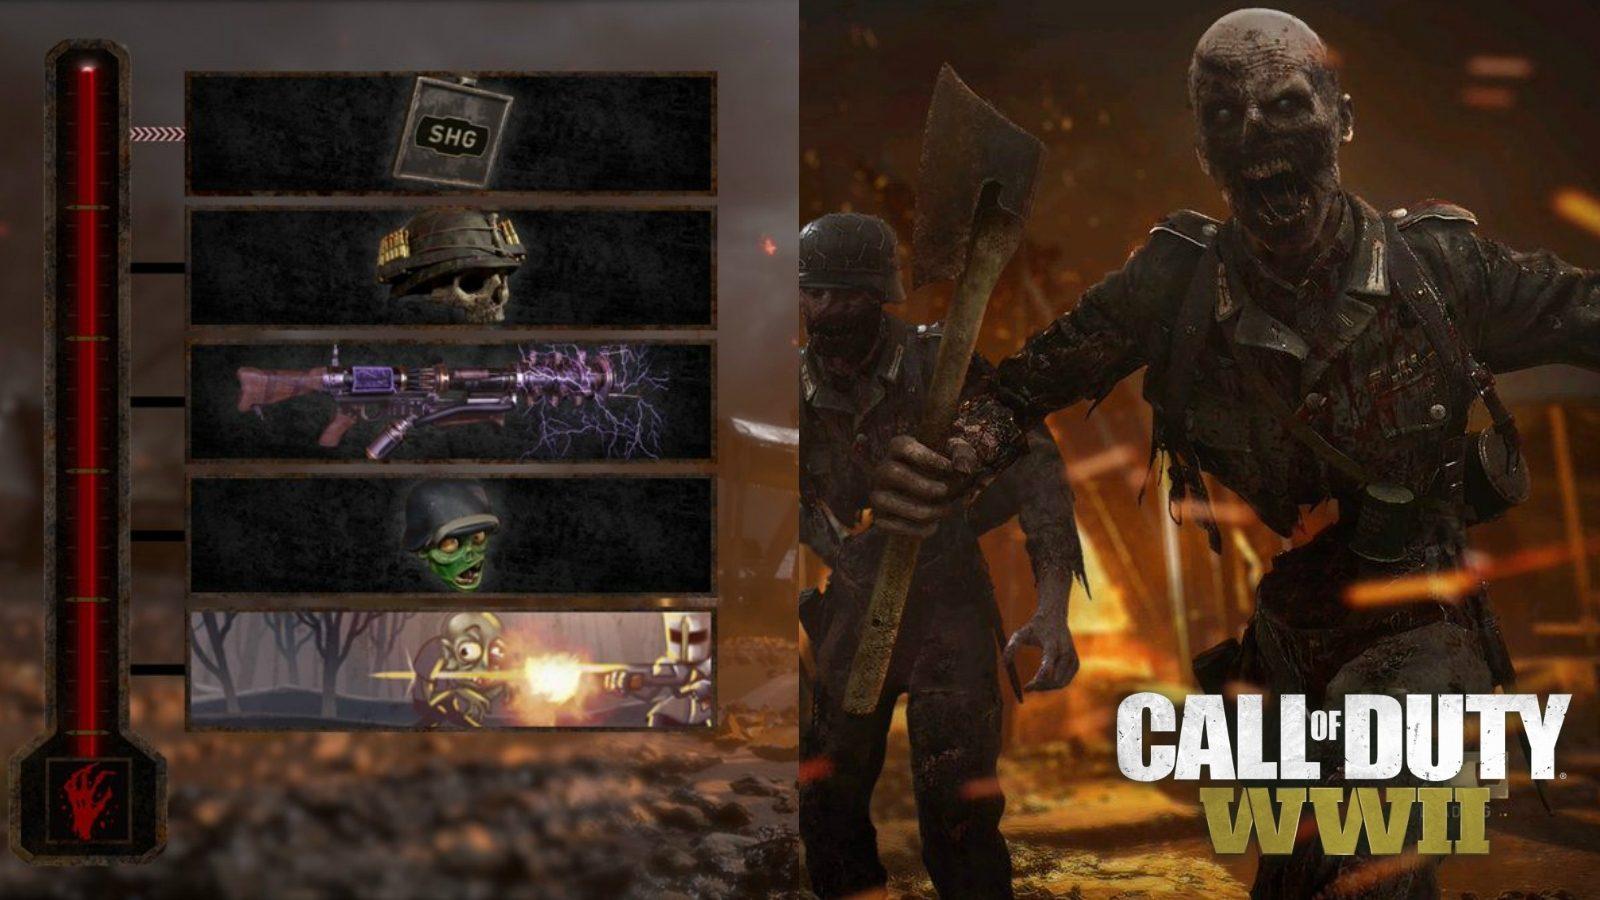 Call of Duty: WWII - Attack of the Undead Survival Guide